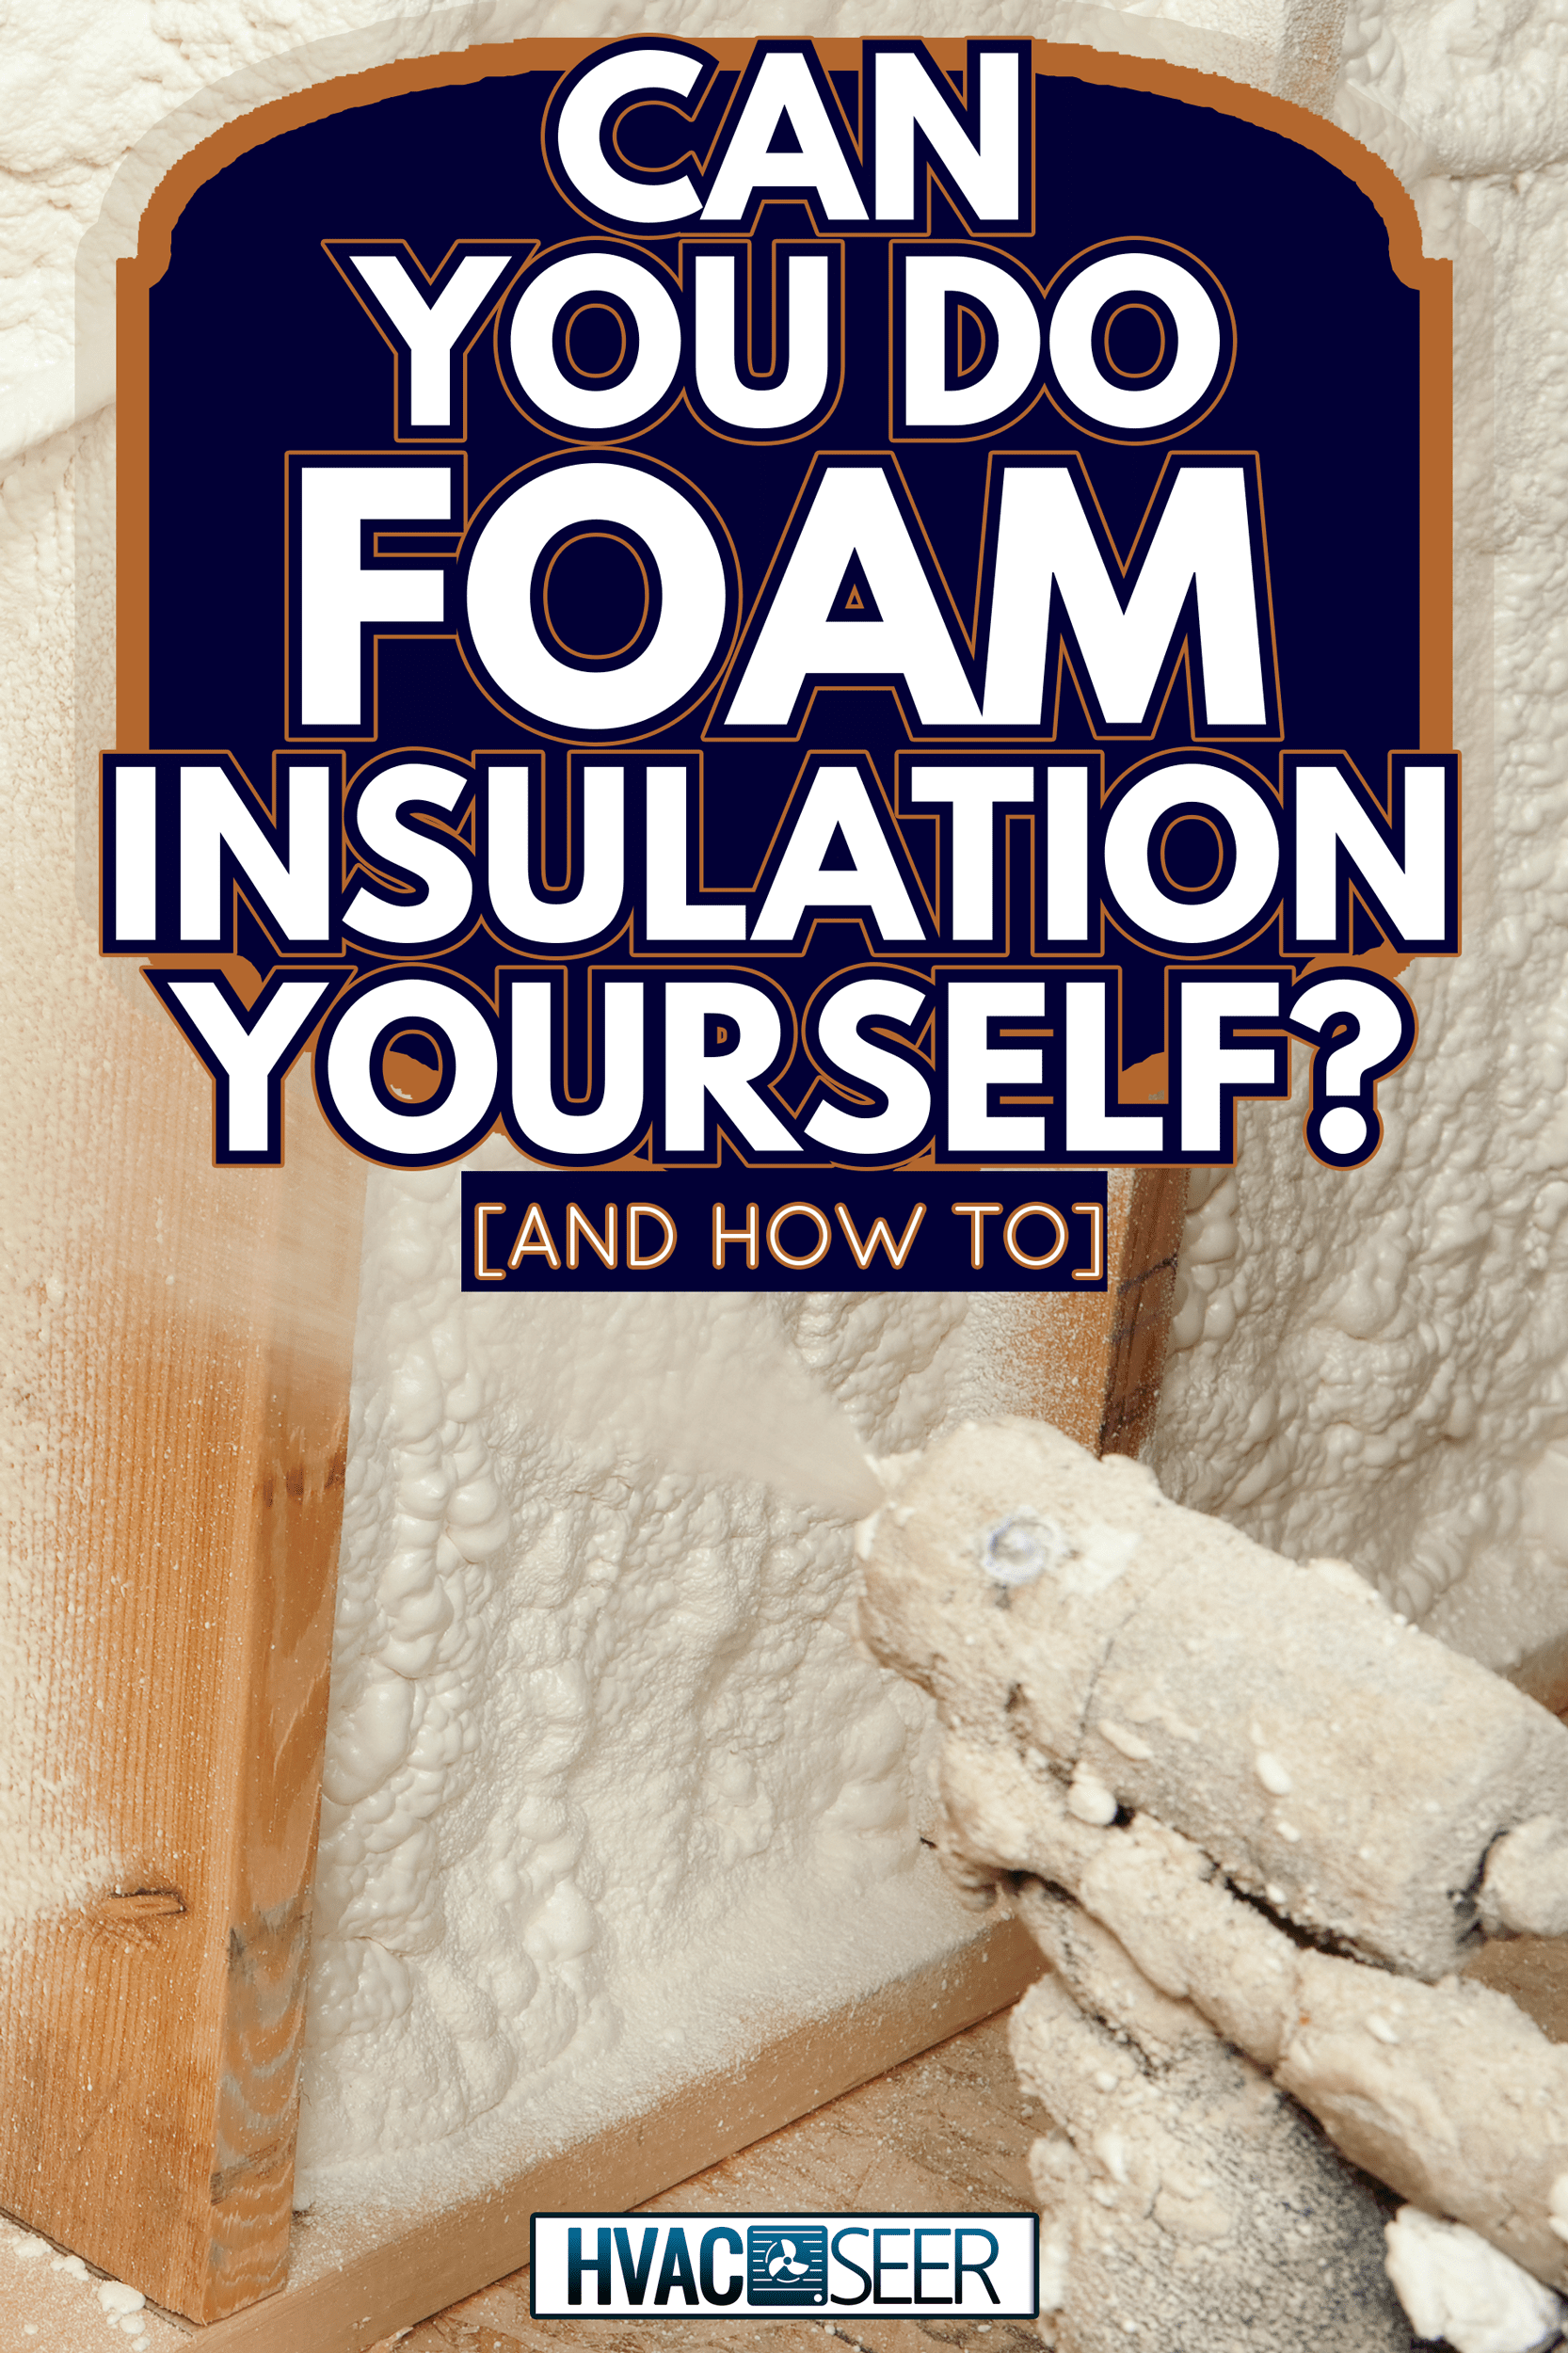 Construction Worker Spraying Expandable Foam Insulation between Wall Studs - Can You Do Foam Insulation Yourself [And How To]